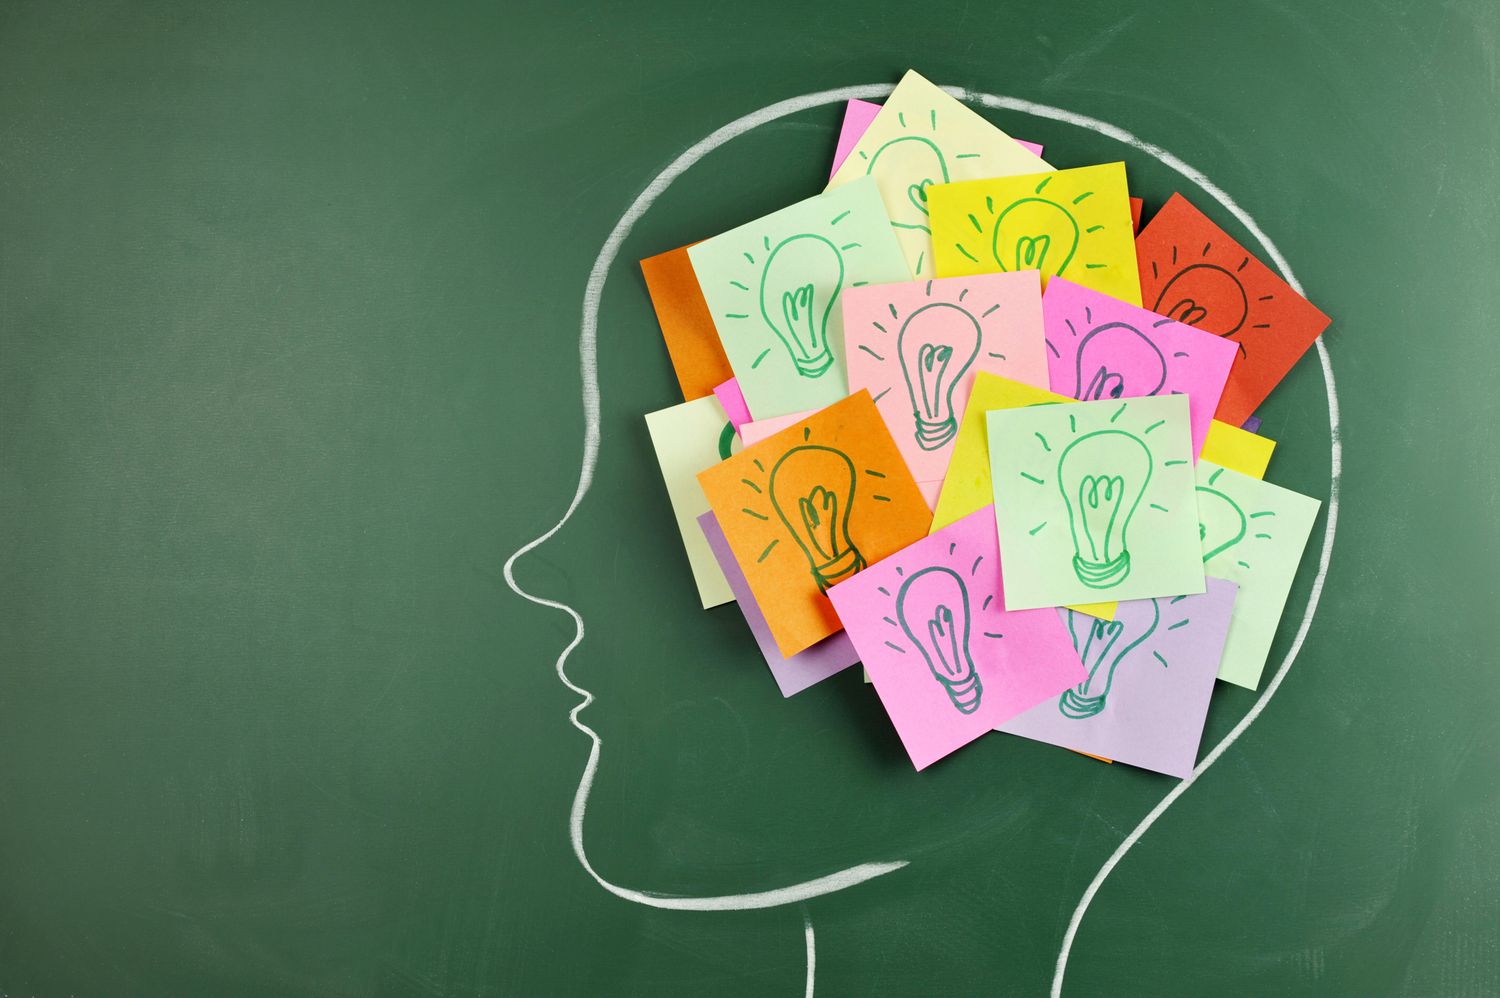 How to Increase Working Memory: The Art of Remembering